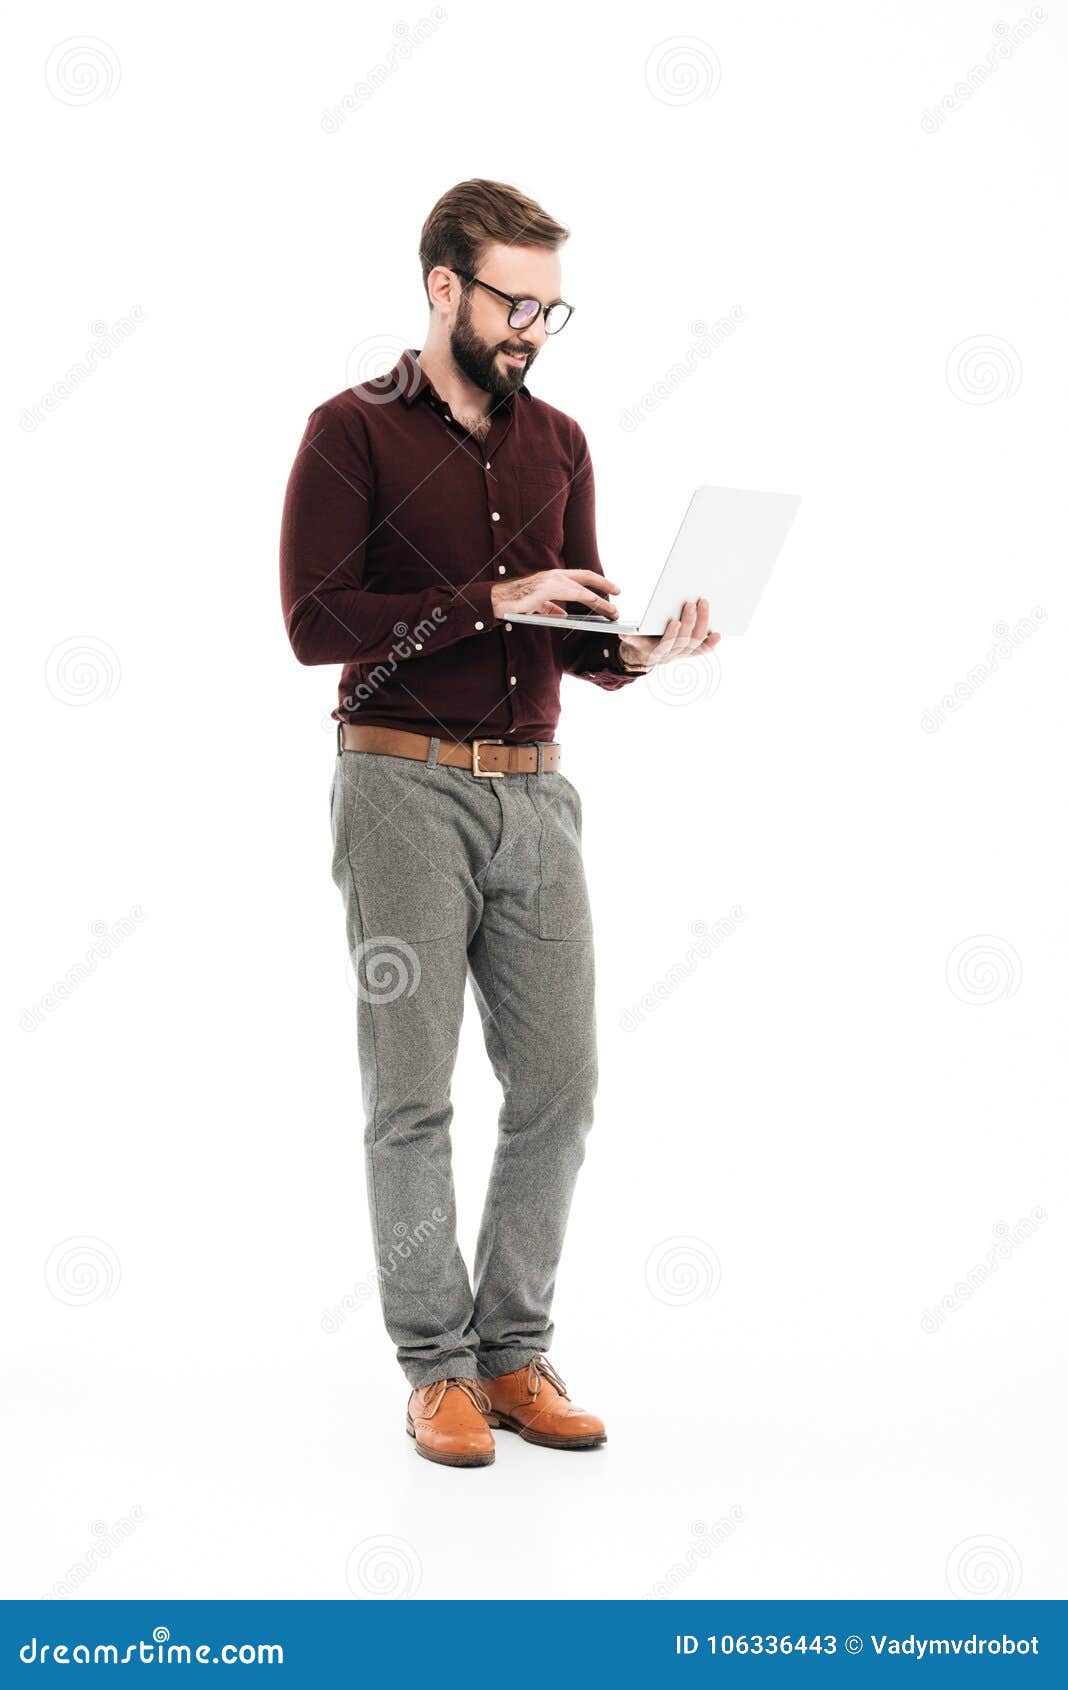 Full Length Portrait of a Confident Successful Man Stock Image - Image ...